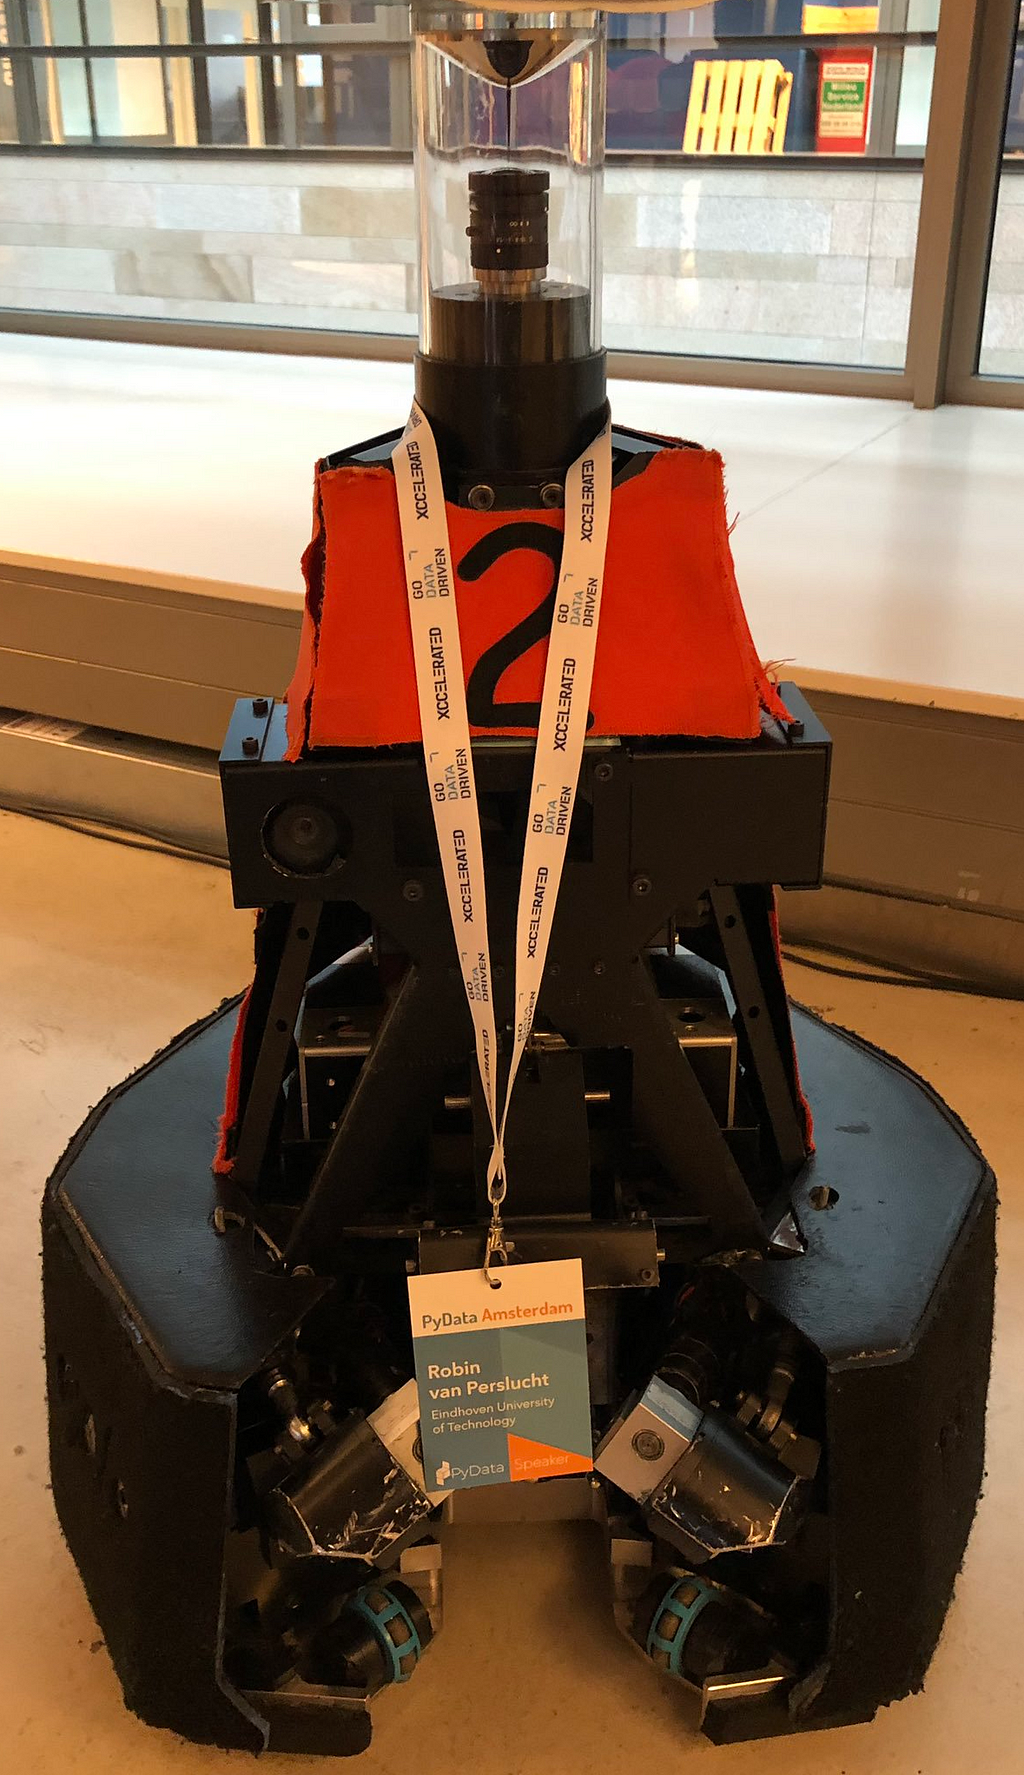 PyData’s first and only robot attendee: The football robot Robin van Perslucht